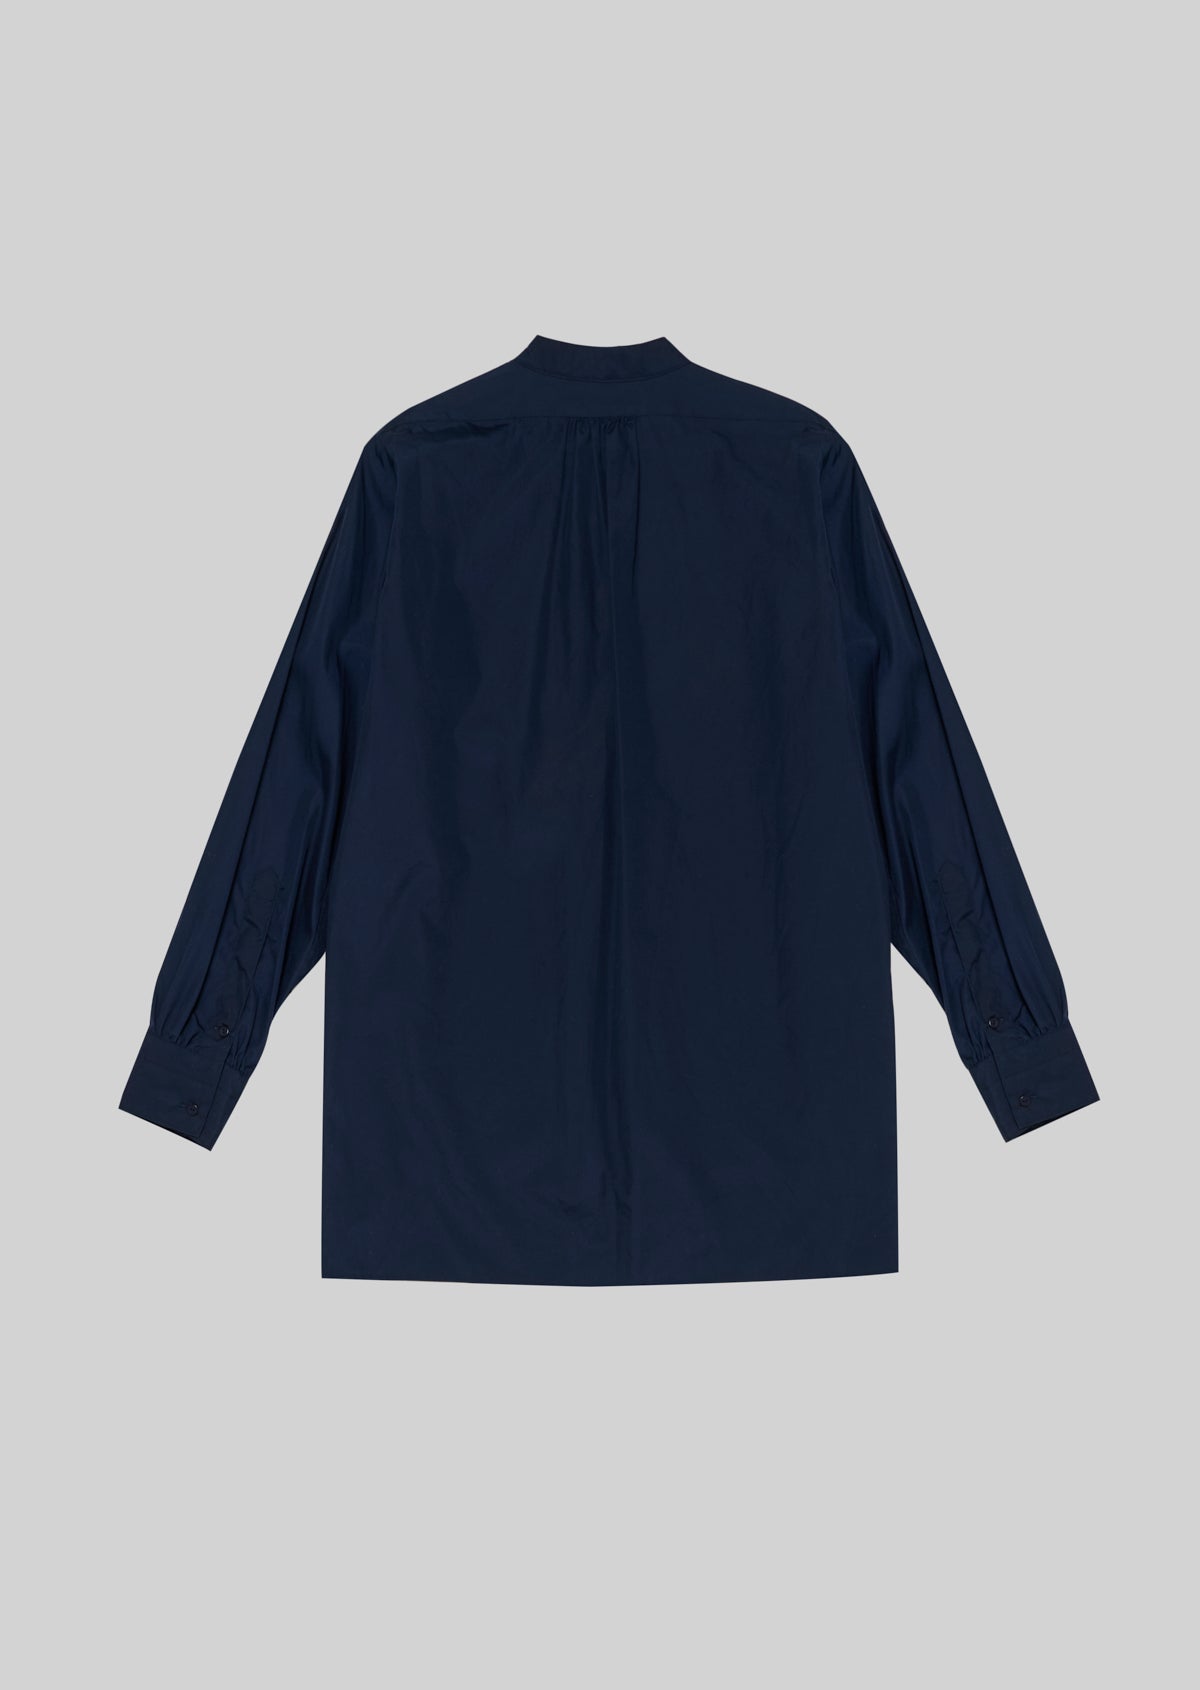 120/2 BROAD CLASSIC FRONT SHIRT NAVY 8211-1101